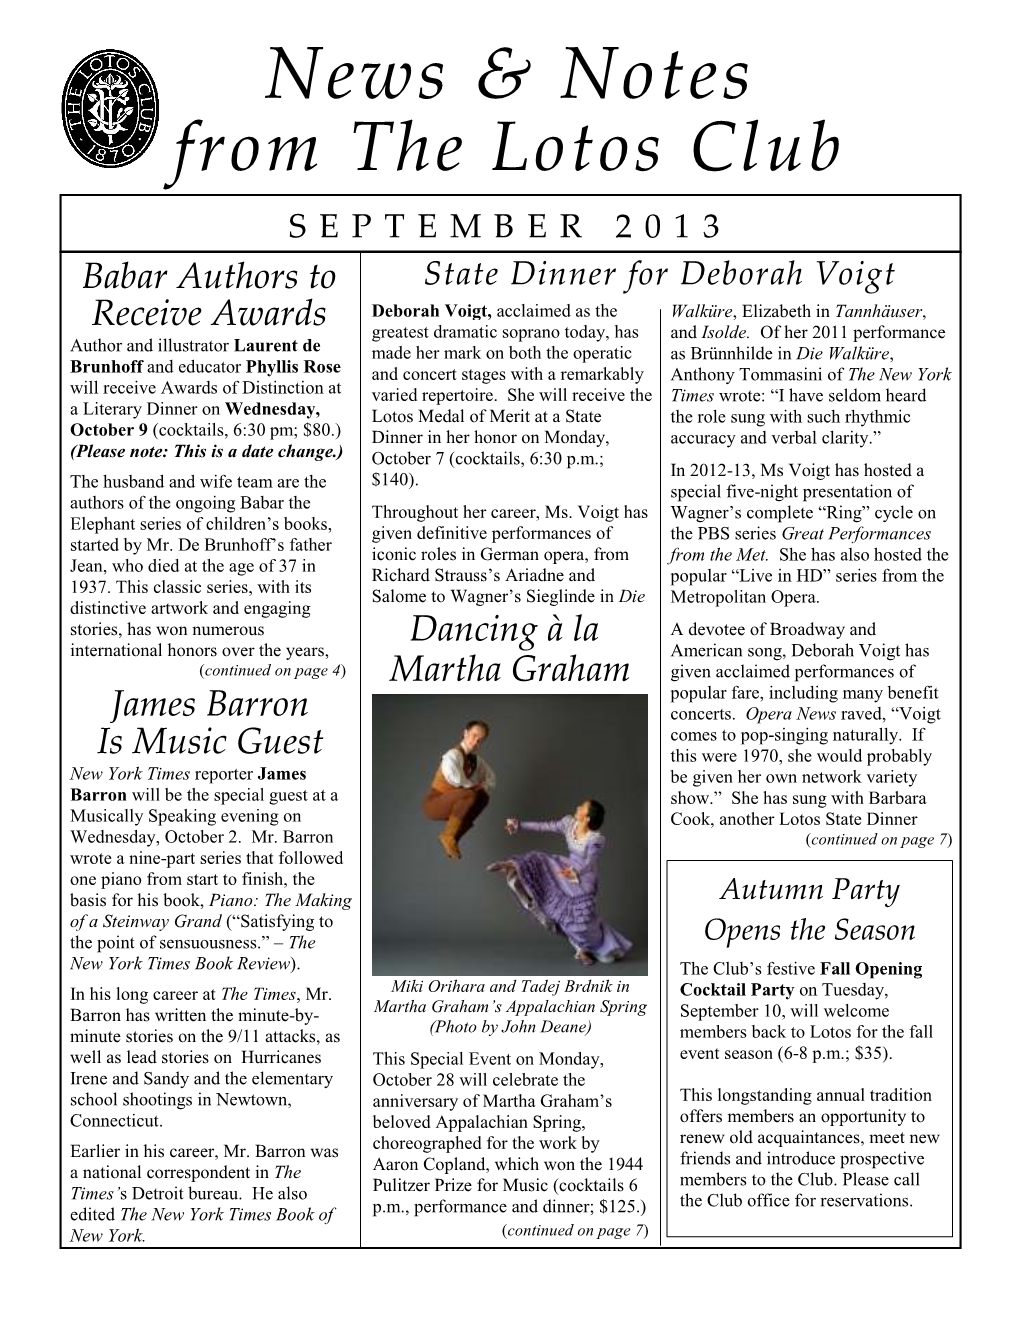 From the Lotos Club News & Notes